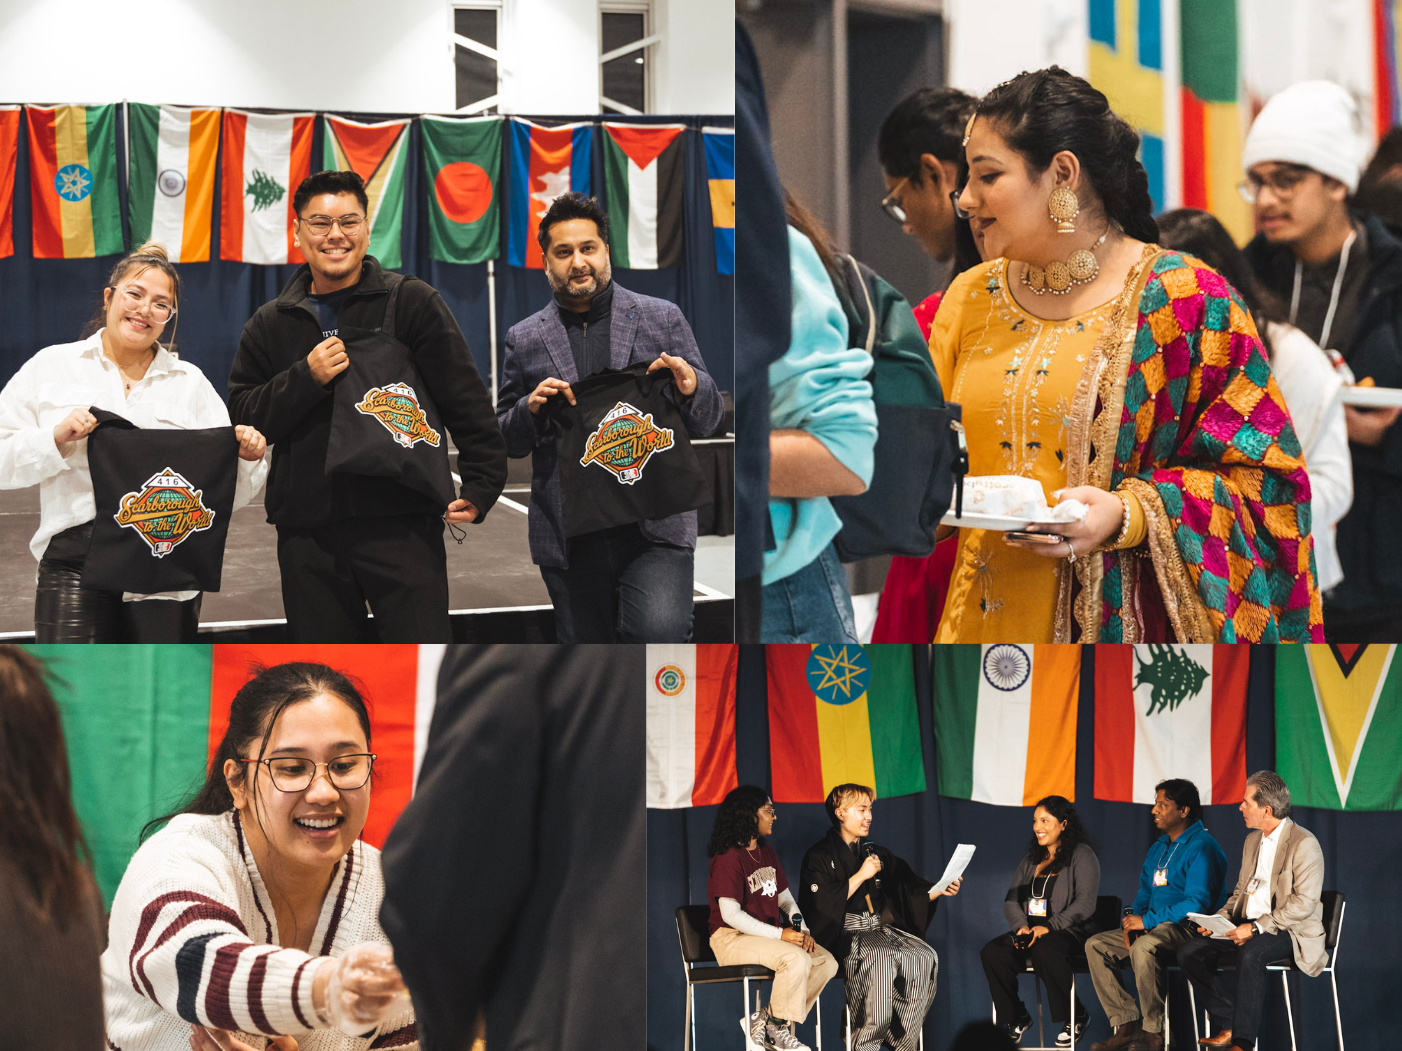 UTSC's "Scarborough to the World" event